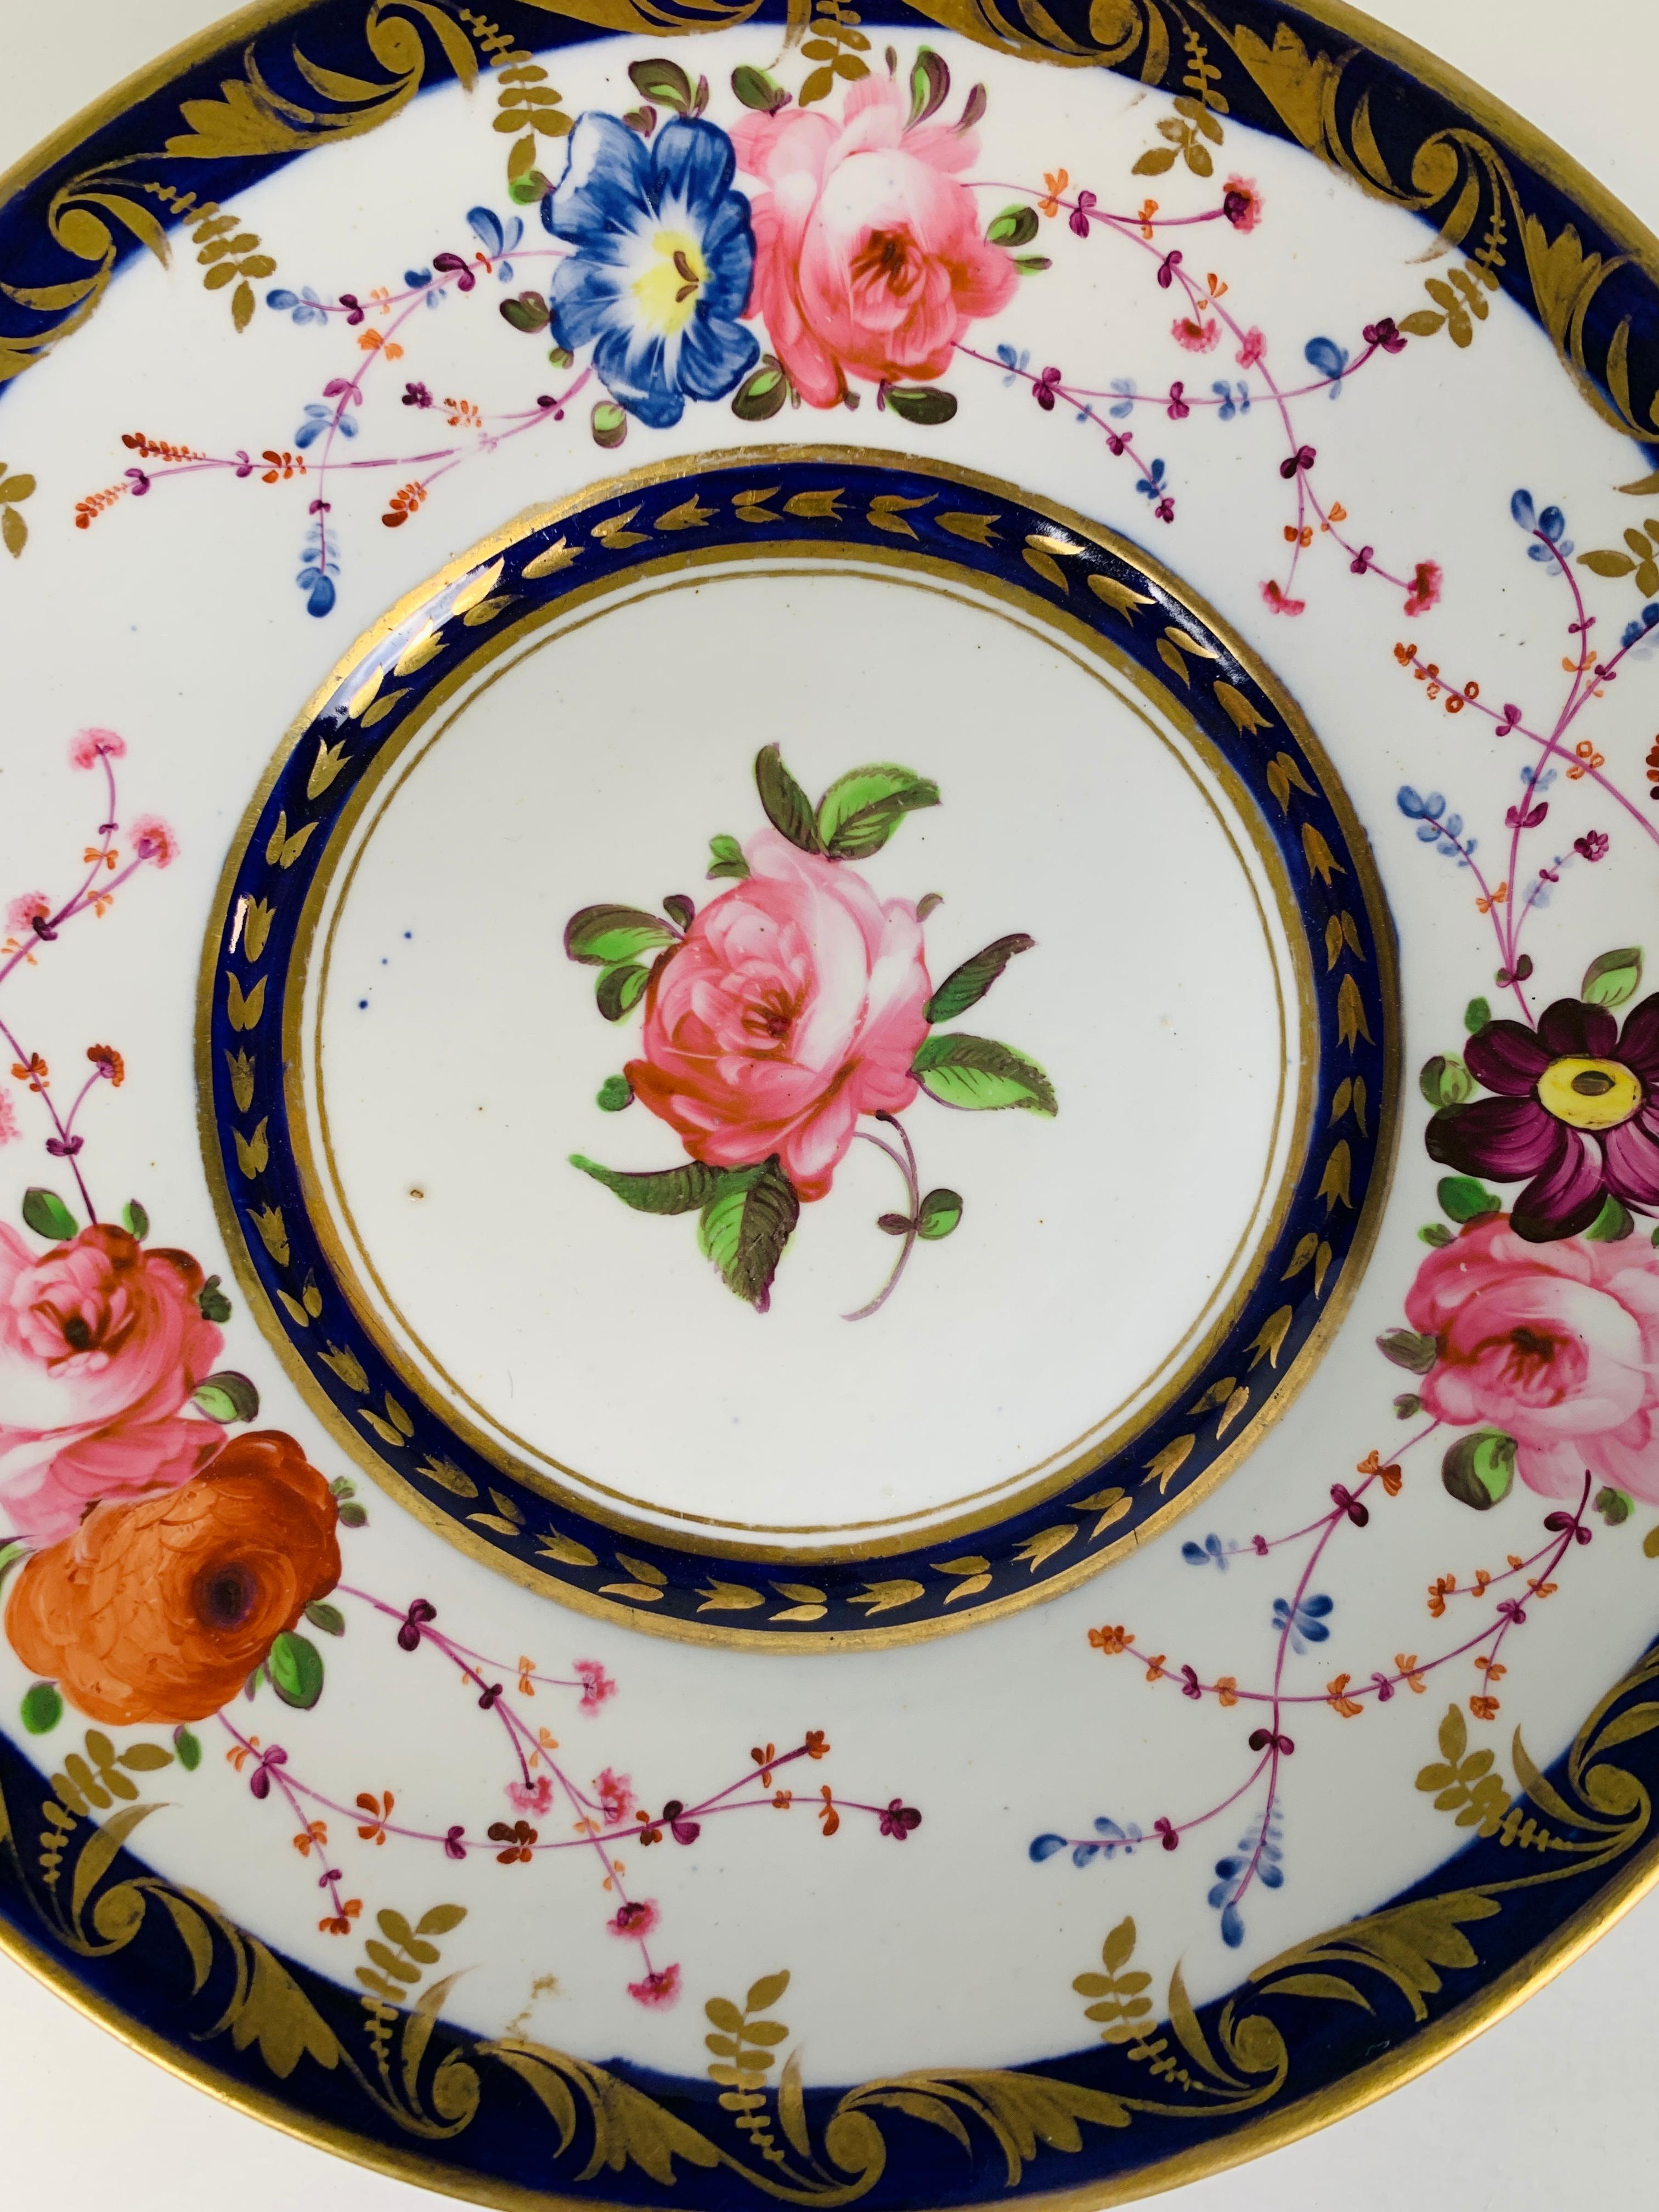 Hand-Painted Antique English Porcelain Dish Made in England Circa 1820 Decorated with Roses For Sale